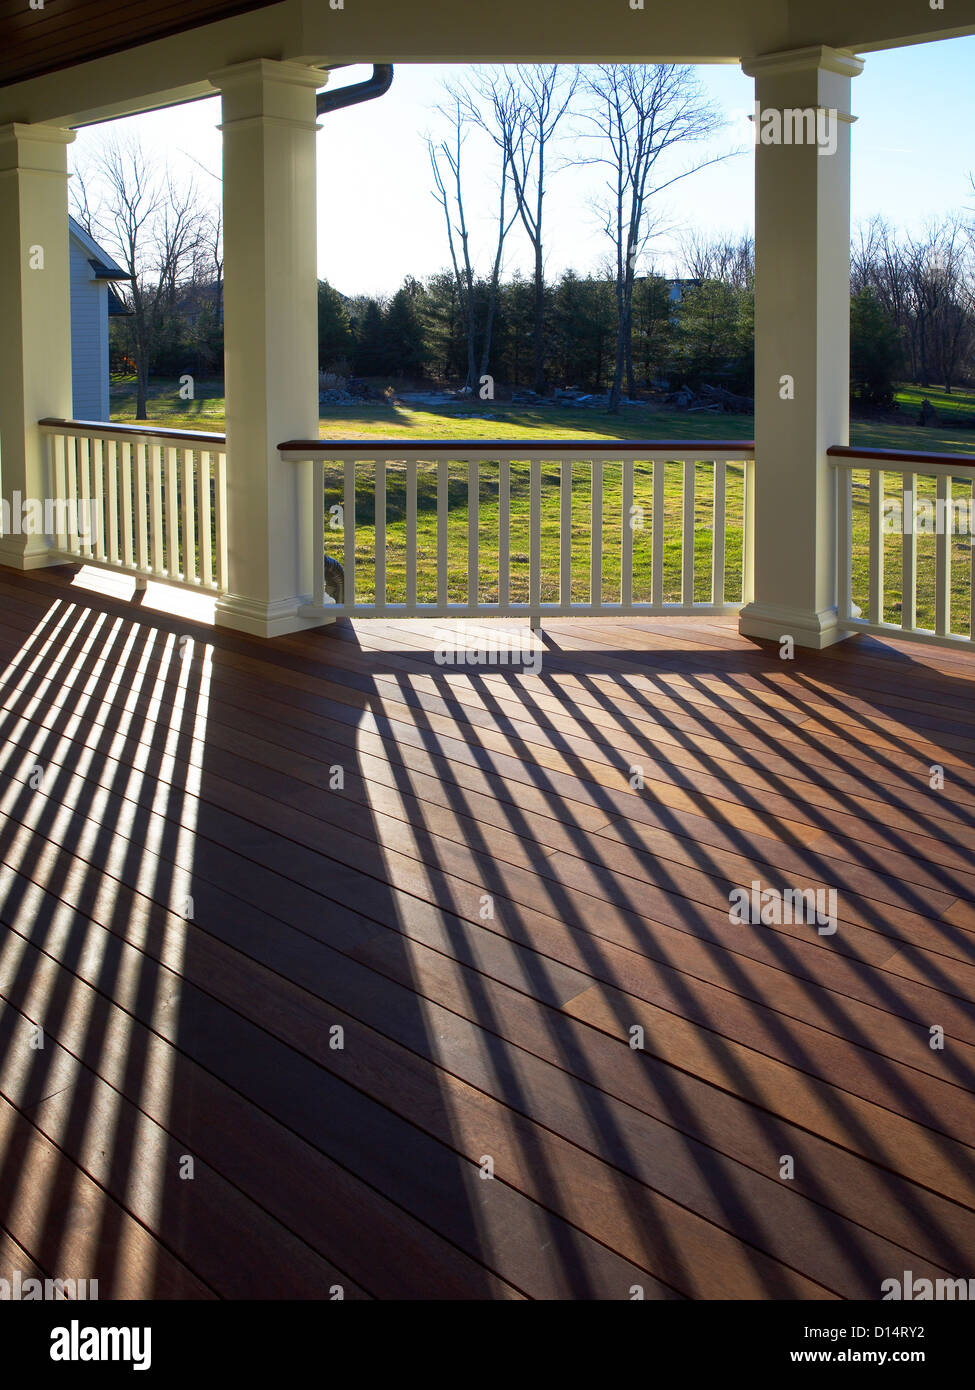 Porch With Sun Shining Making Shadows On Deck Stock Photo